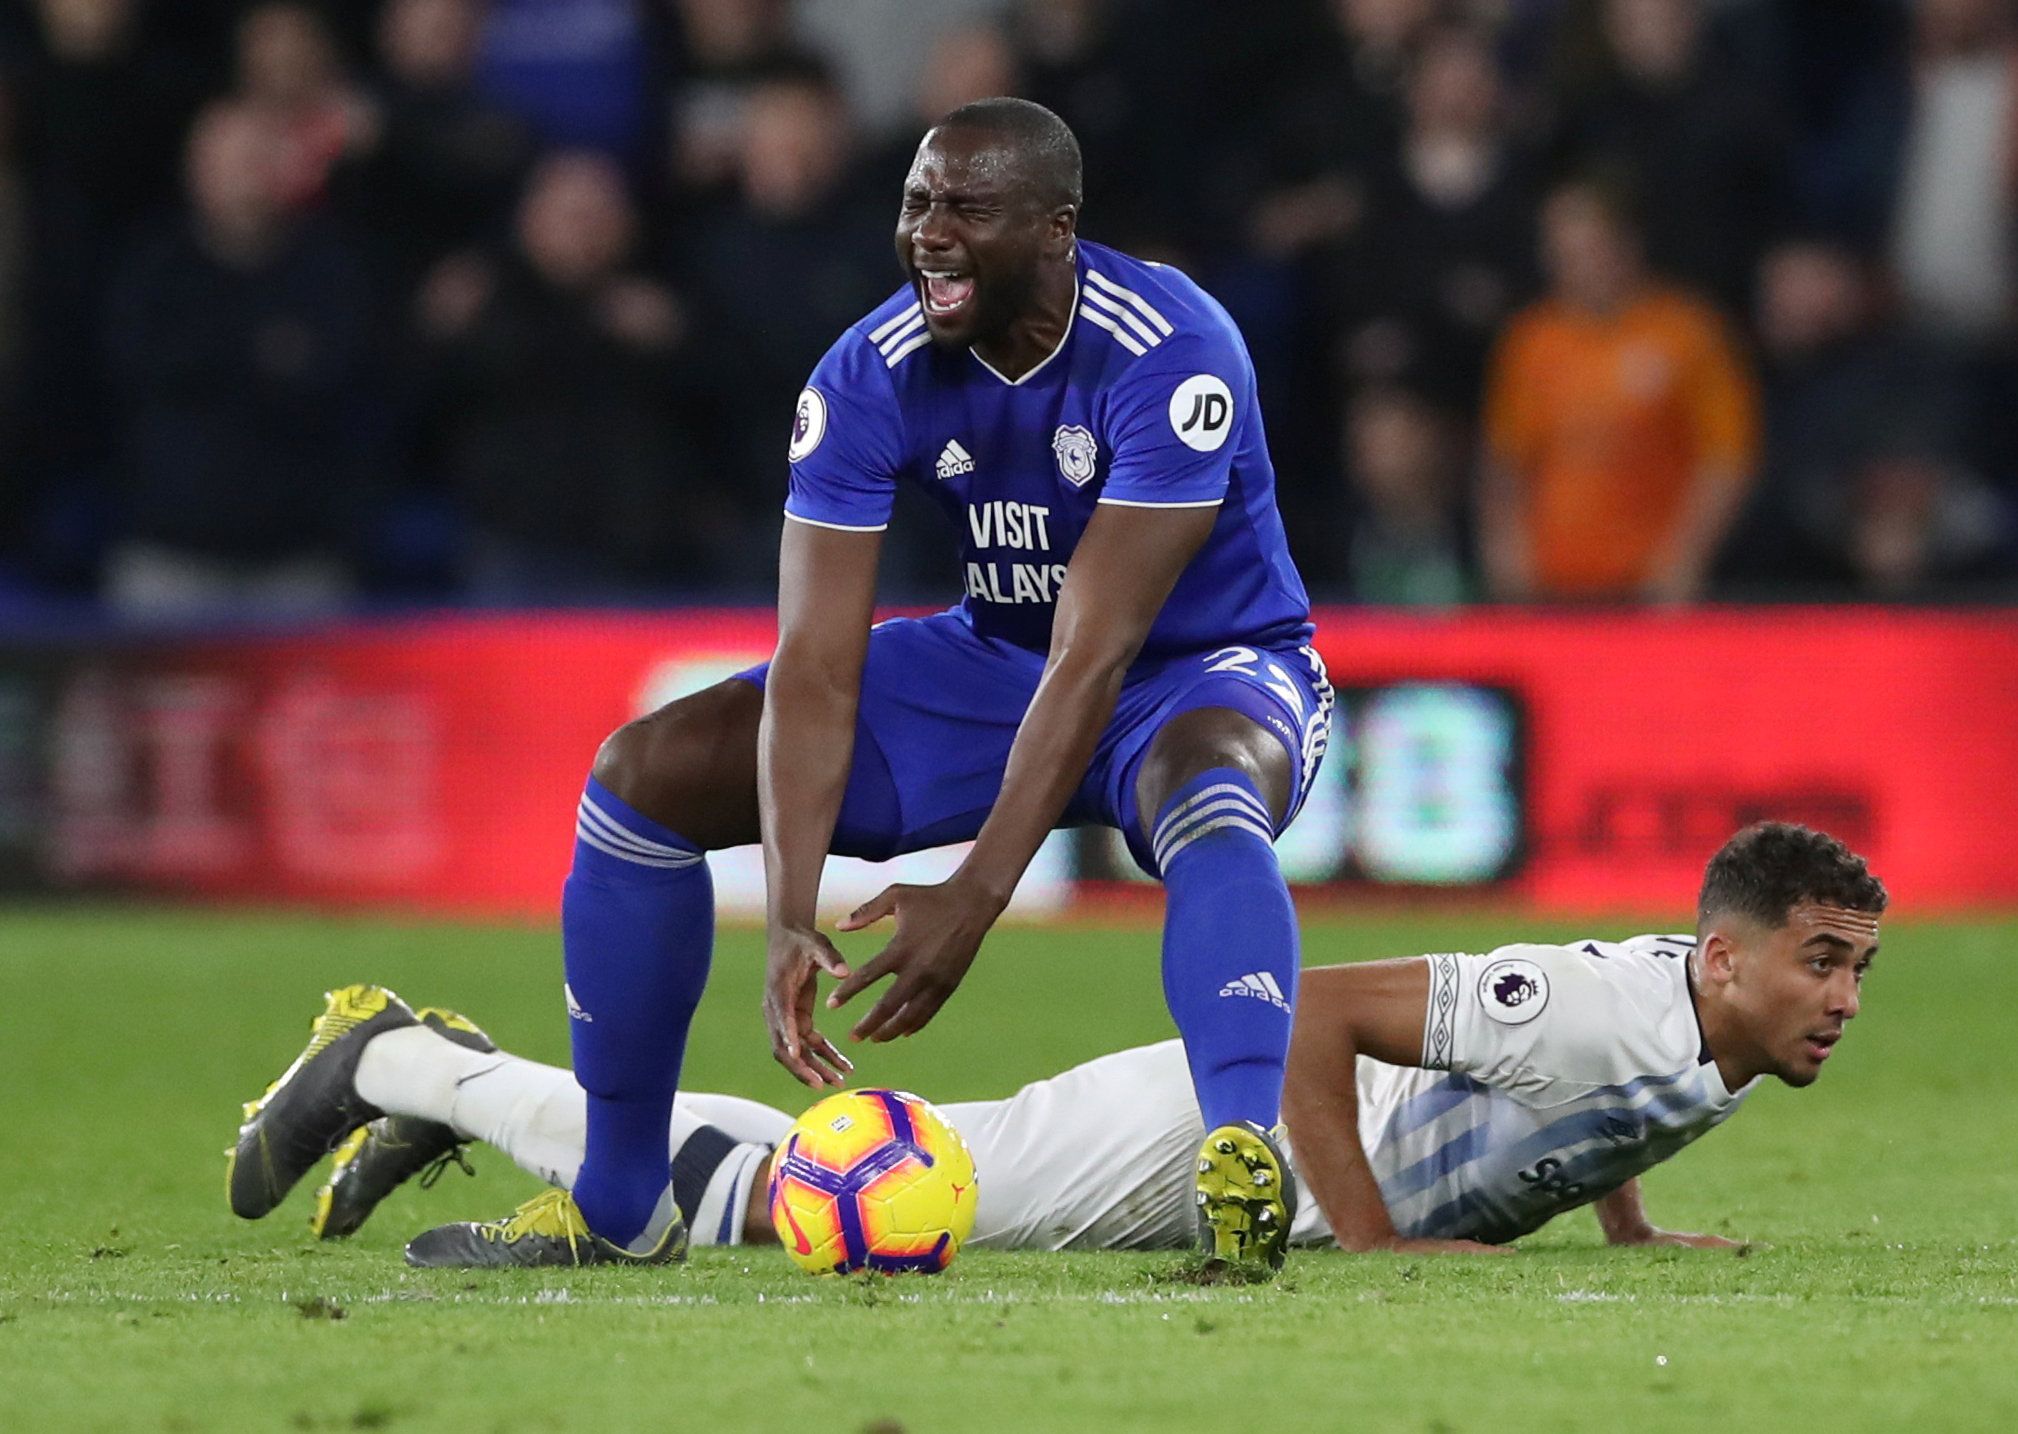 Soccer Football - Premier League - Cardiff City v Everton - Cardiff City Stadium, Cardiff, Britain - February 26, 2019  Cardiff City's Sol Bamba reacts a Everton's Dominic Calvert-Lewin looks on      Action Images via Reuters/Peter Cziborra  EDITORIAL USE ONLY. No use with unauthorized audio, video, data, fixture lists, club/league logos or 